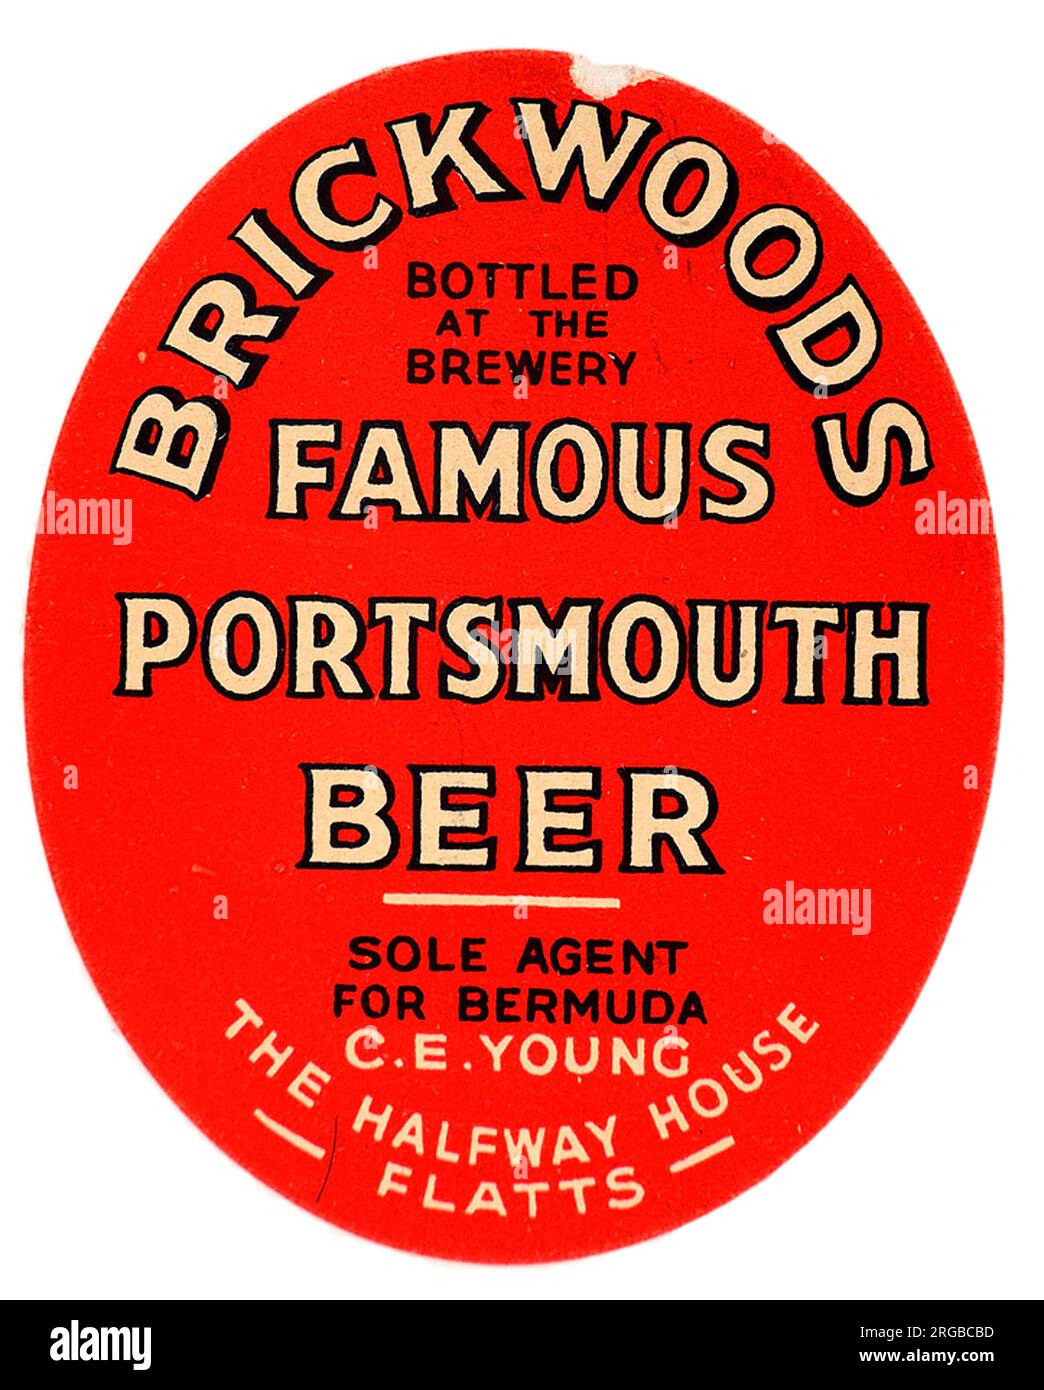 Brickwoods Famous Portsmouth Beer Stock Photo